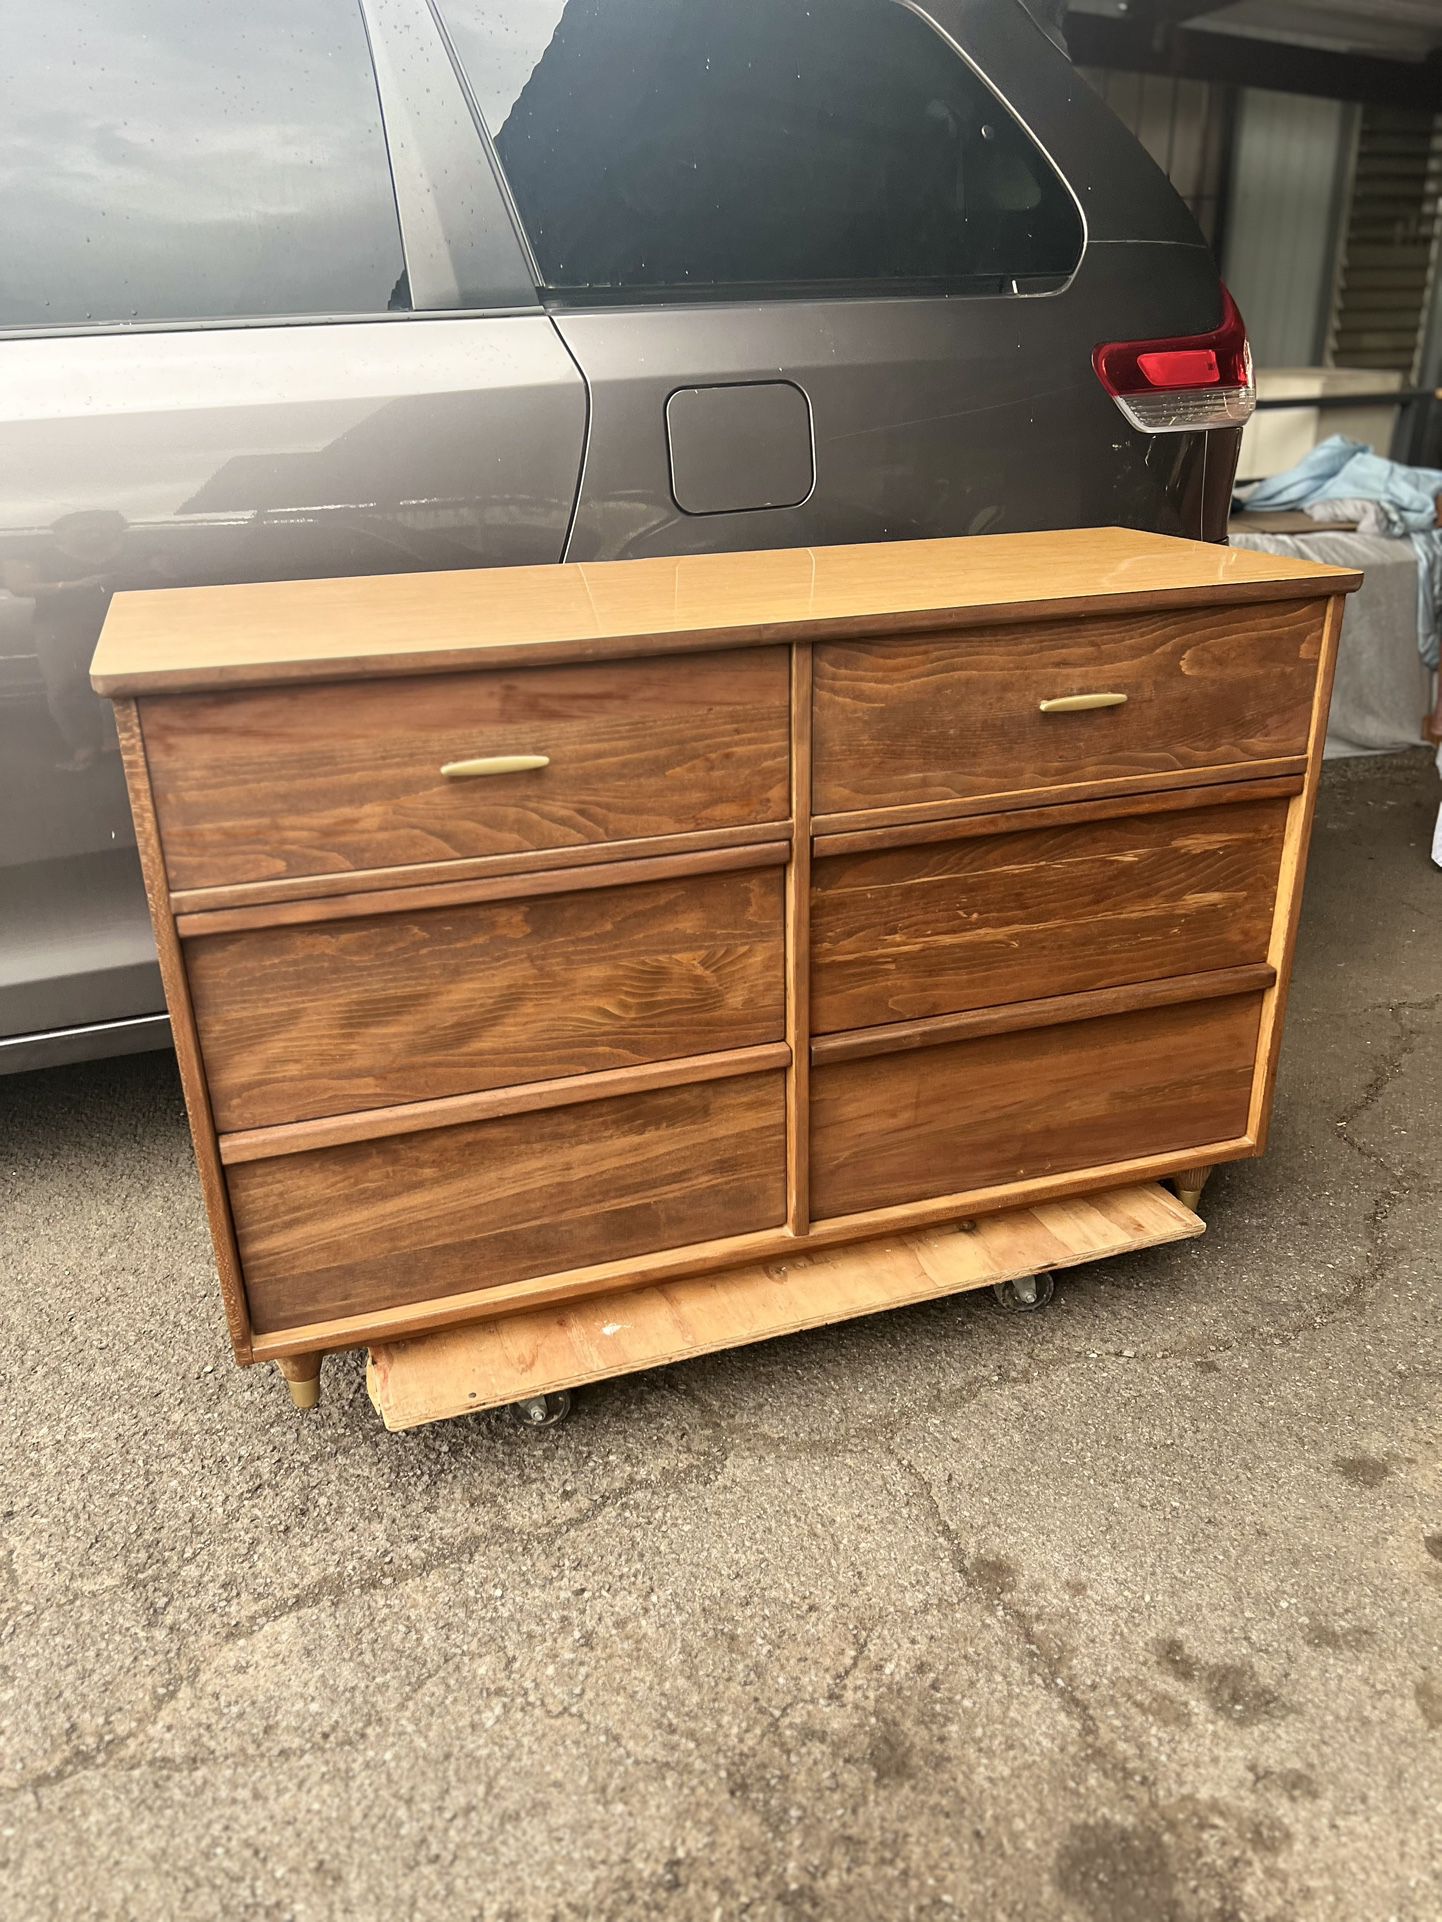 Cool Compact Mid-century 6 Drawer Dresser